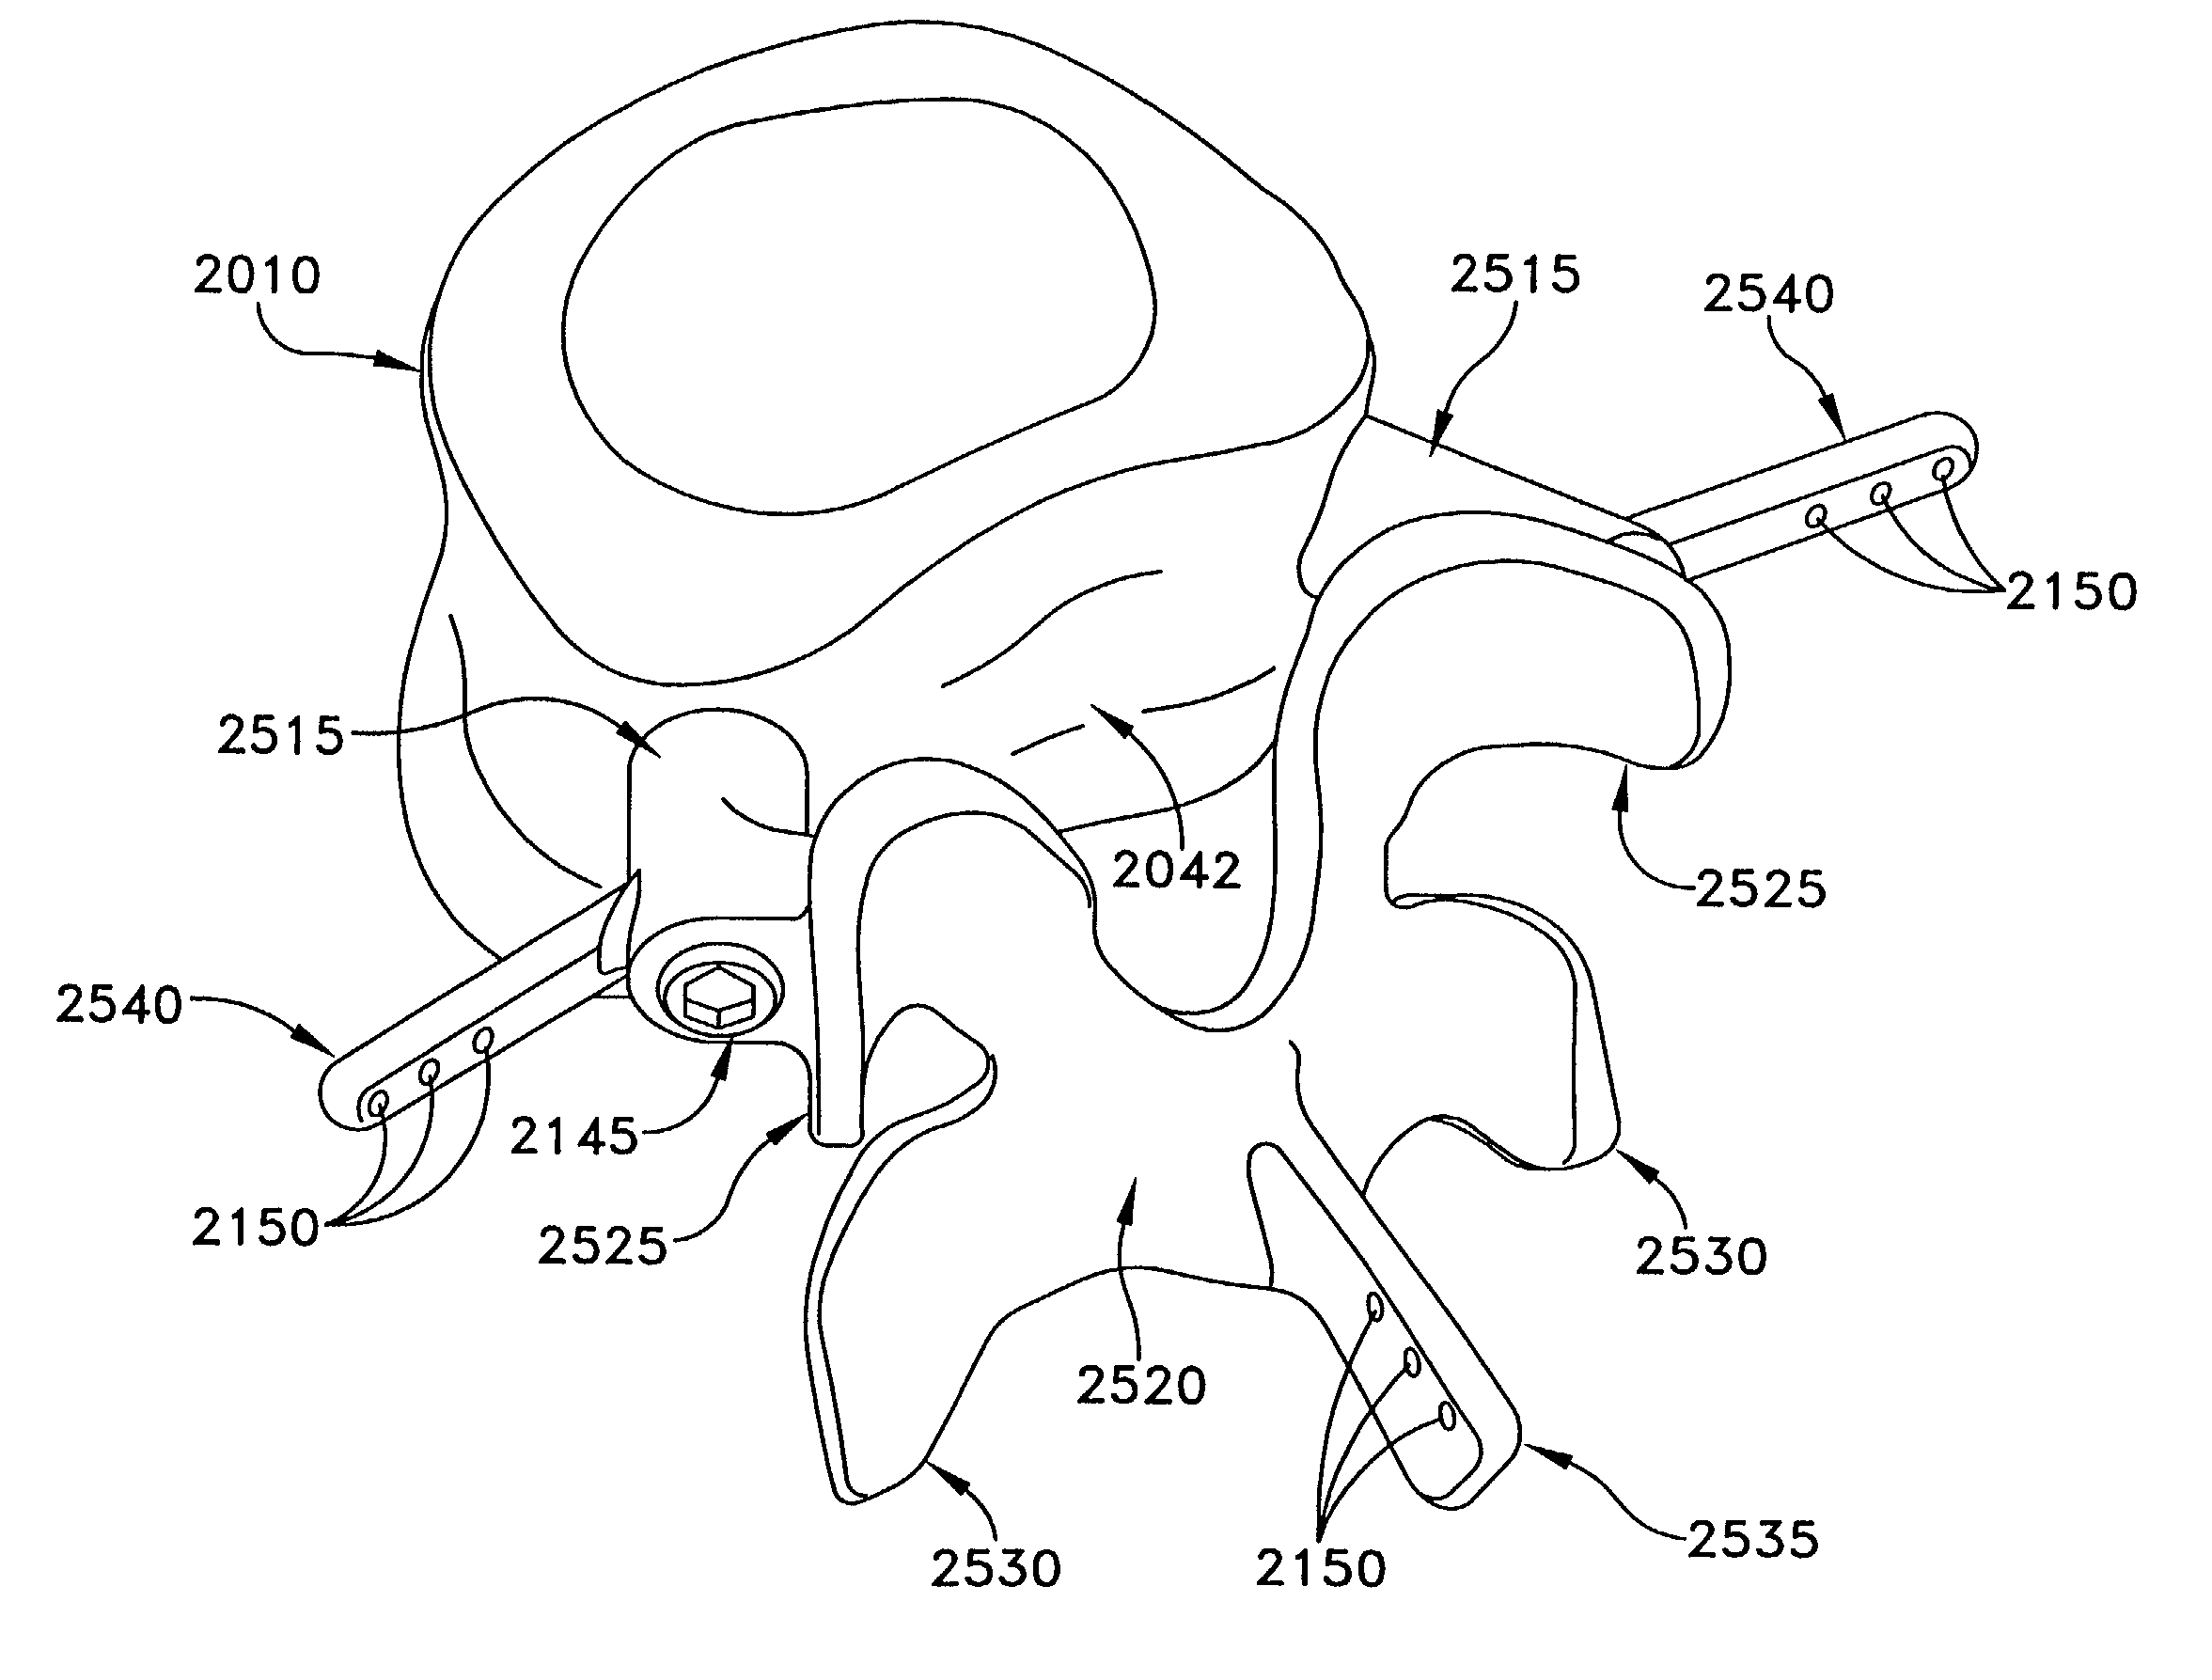 Method and apparatus for spine joint replacement